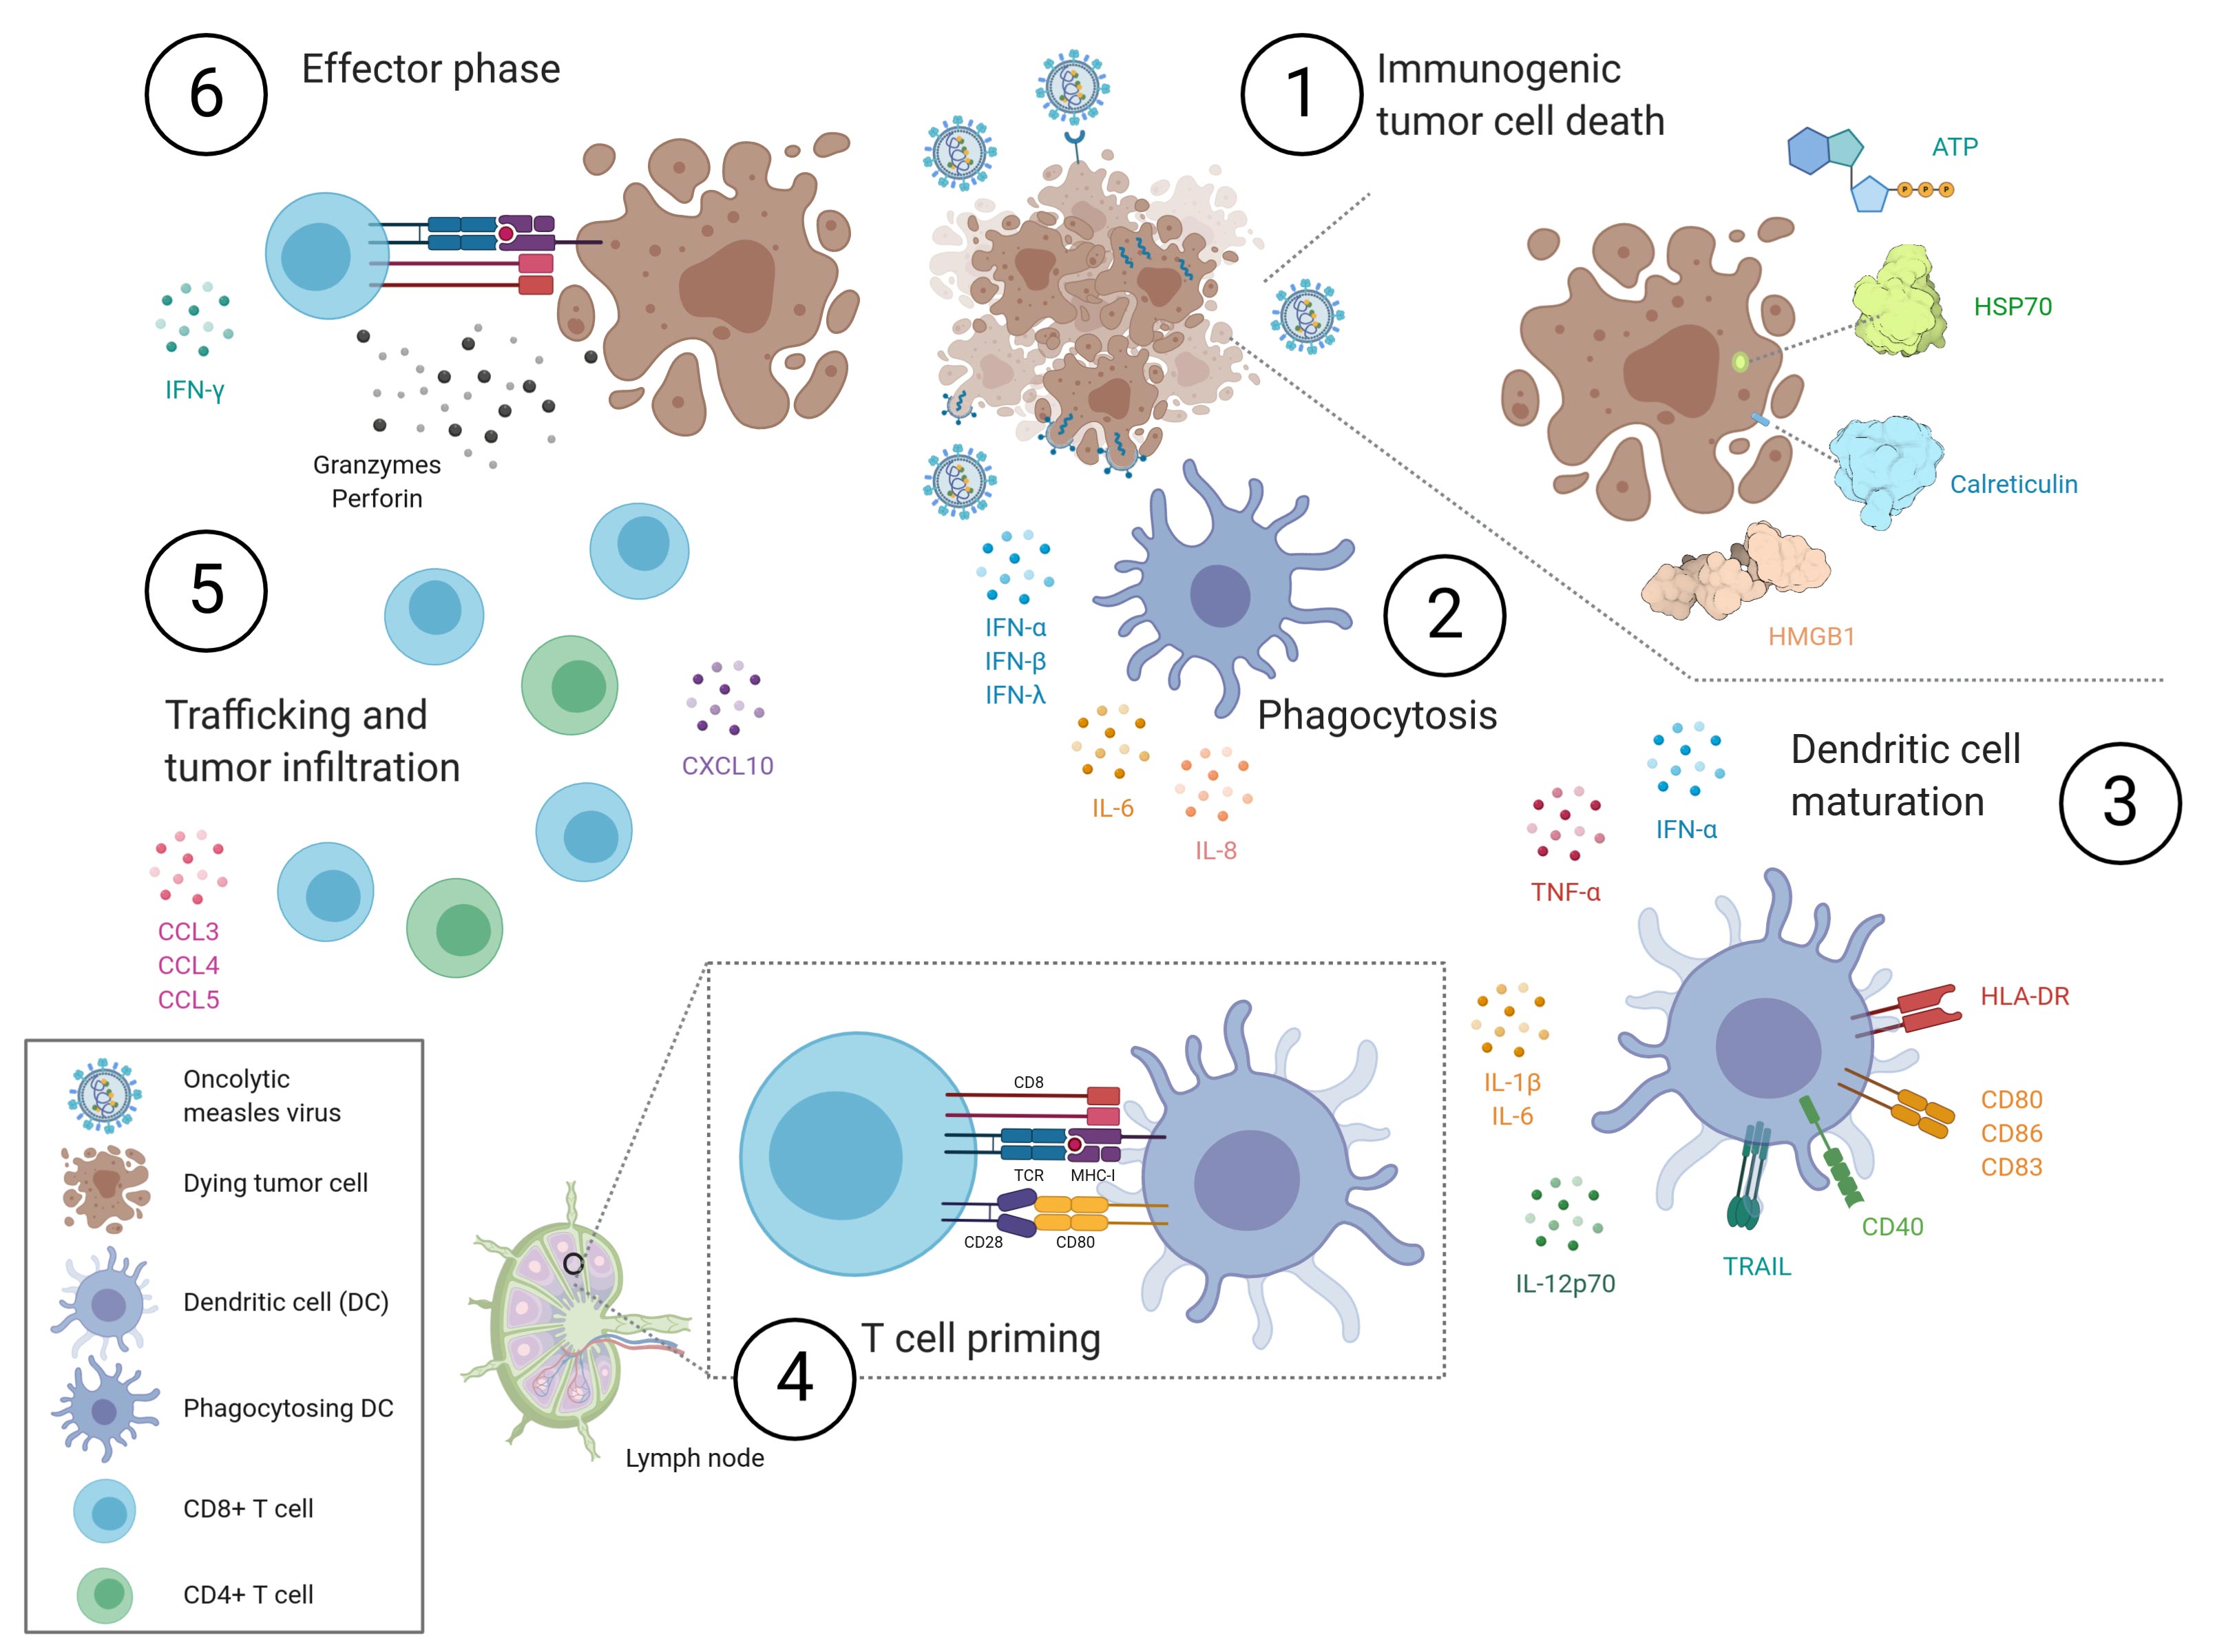 Measles virus oncolysis and the cancer immunity cycle